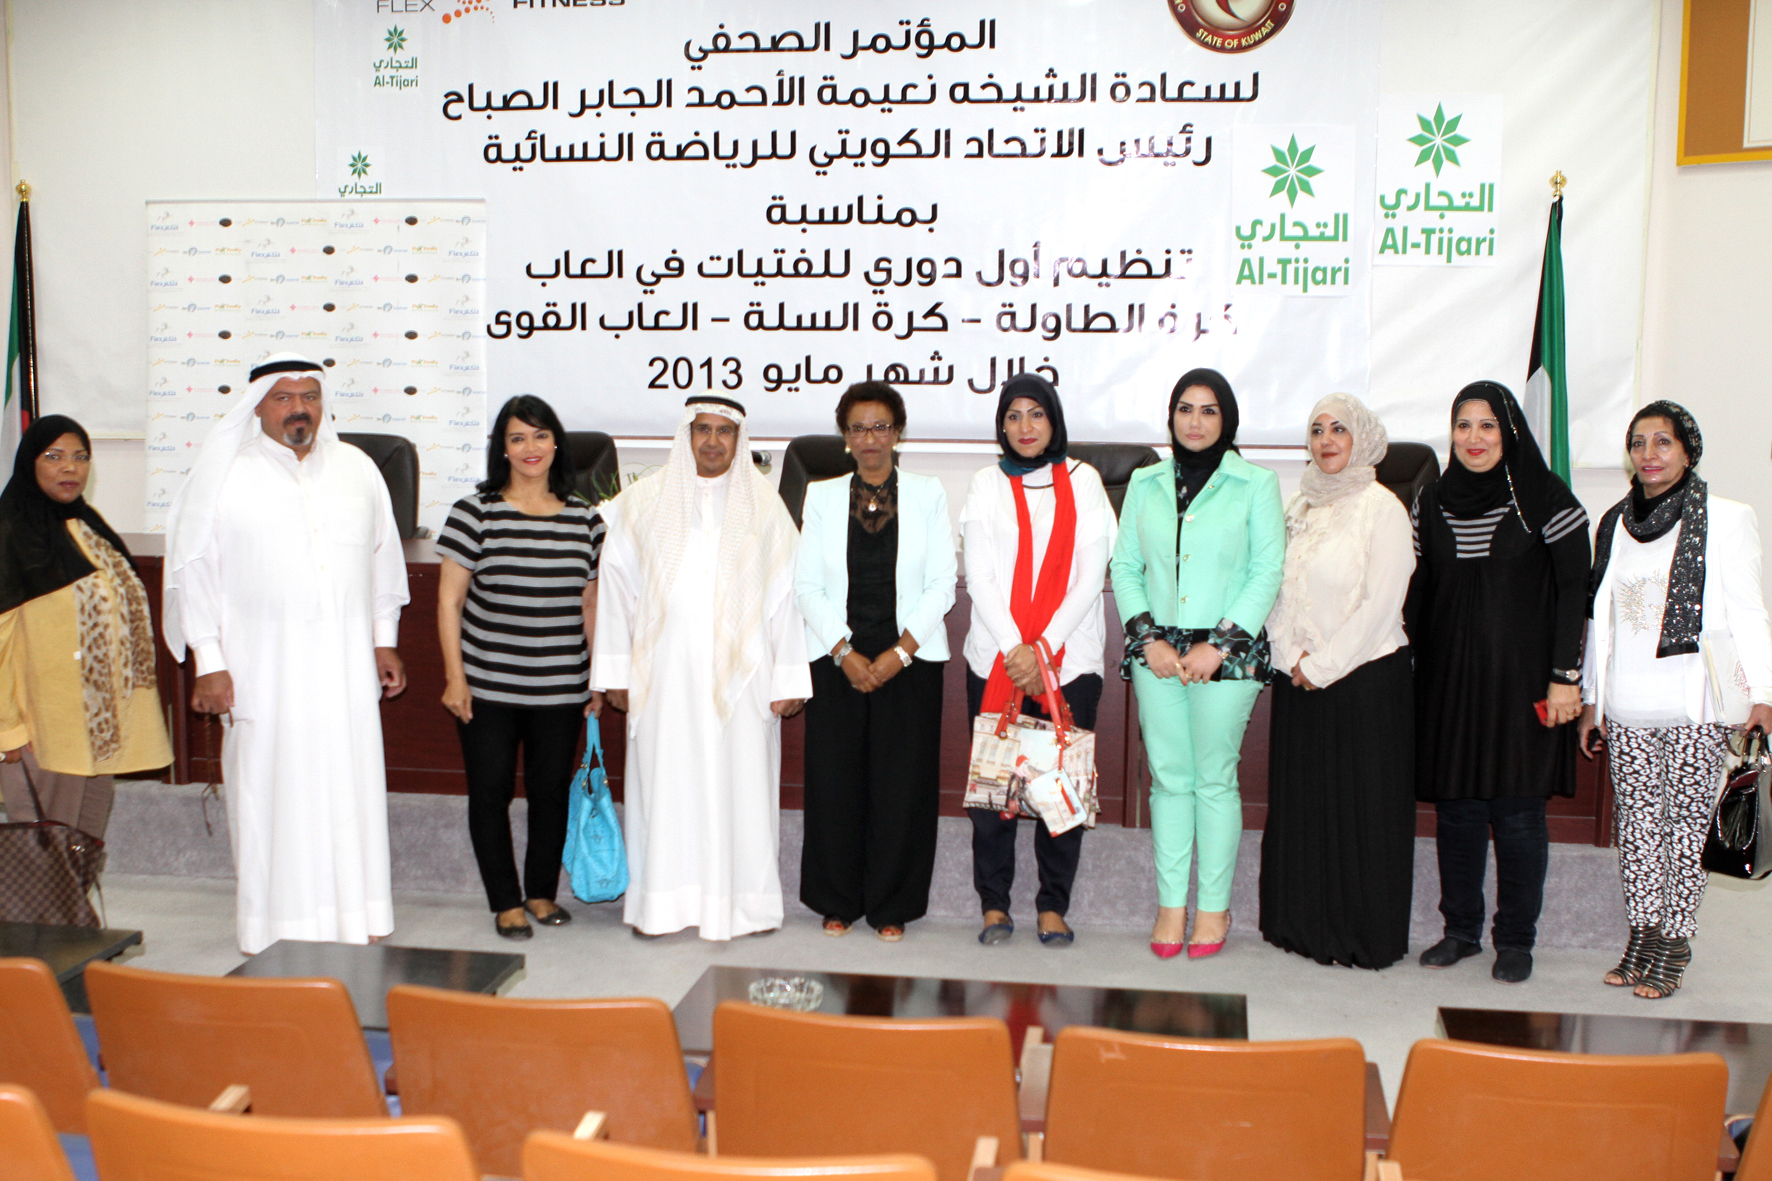 The President of the federation Sheikha Naima Al-Ahmad Al-Jaber Al-Sabah with representatives of the clubs participating in the first Women's League